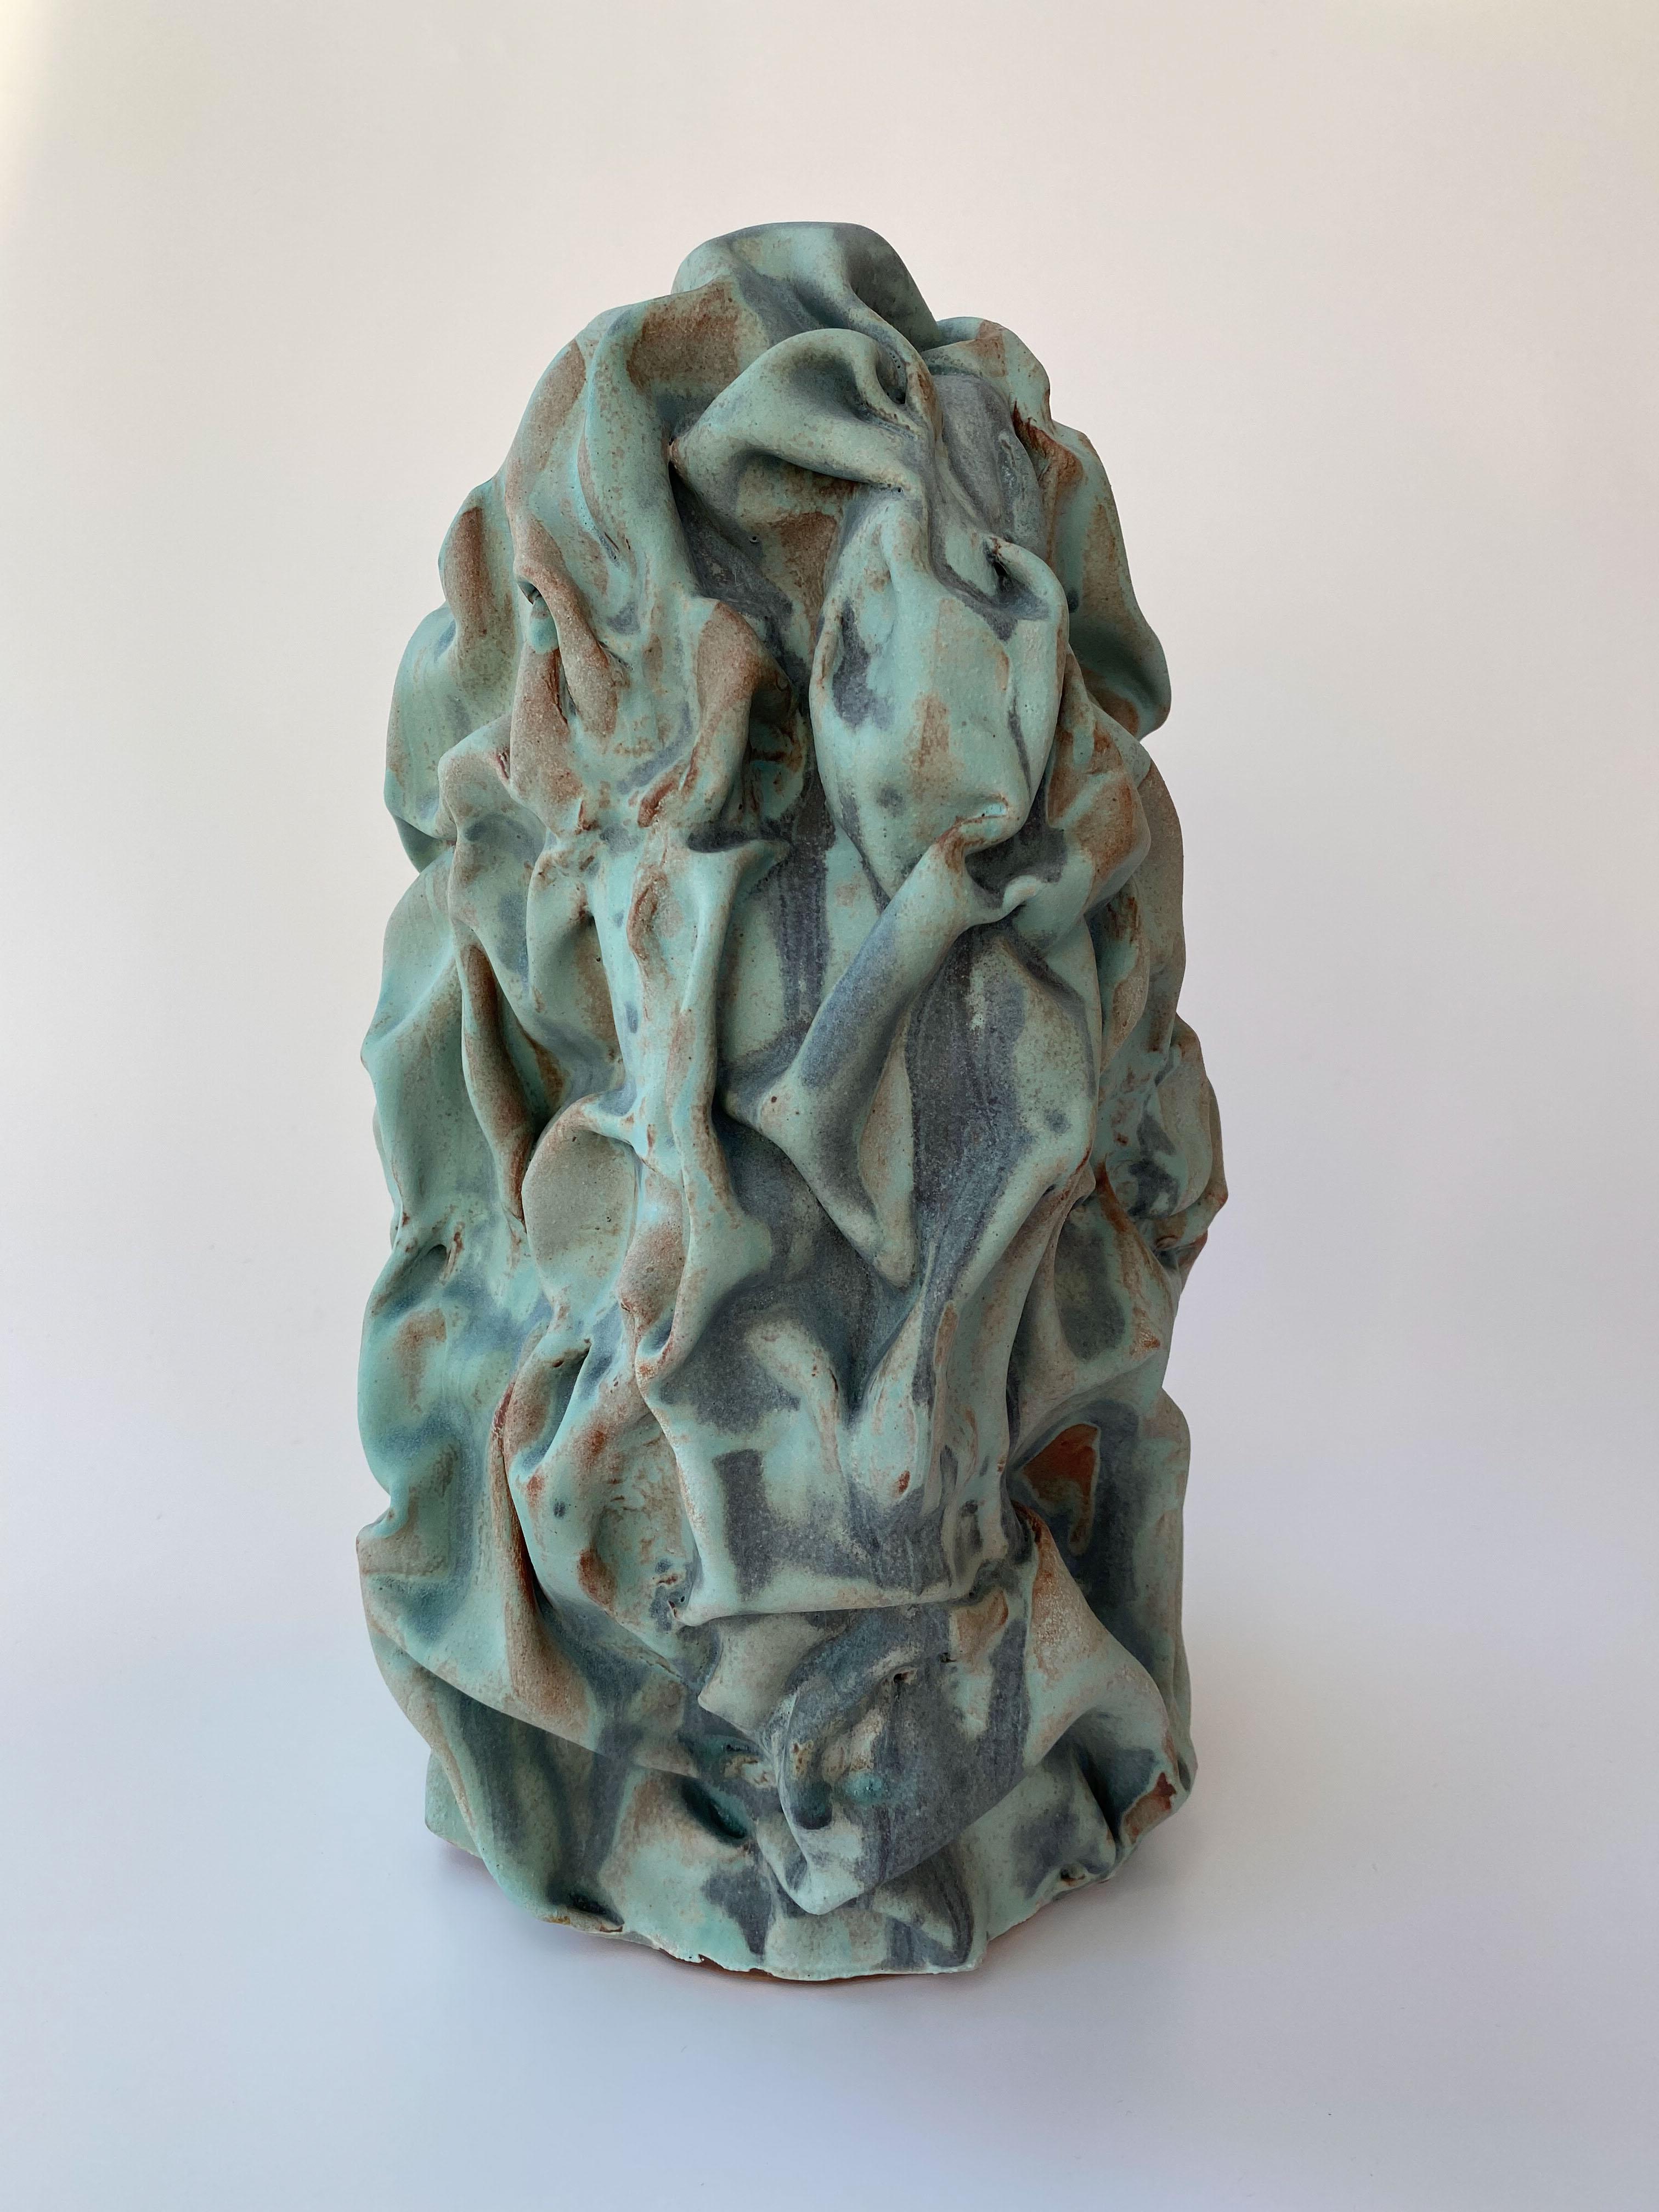 Motion sculpture III by Sophie Rogers
Dimensions: W 18 x H 35 cm.
Materials: ceramic, glaze
Other glaze colors available.

A play with the material Clay’s heard final conclusion, this is a warm and living sculpture that attracts to be touched.